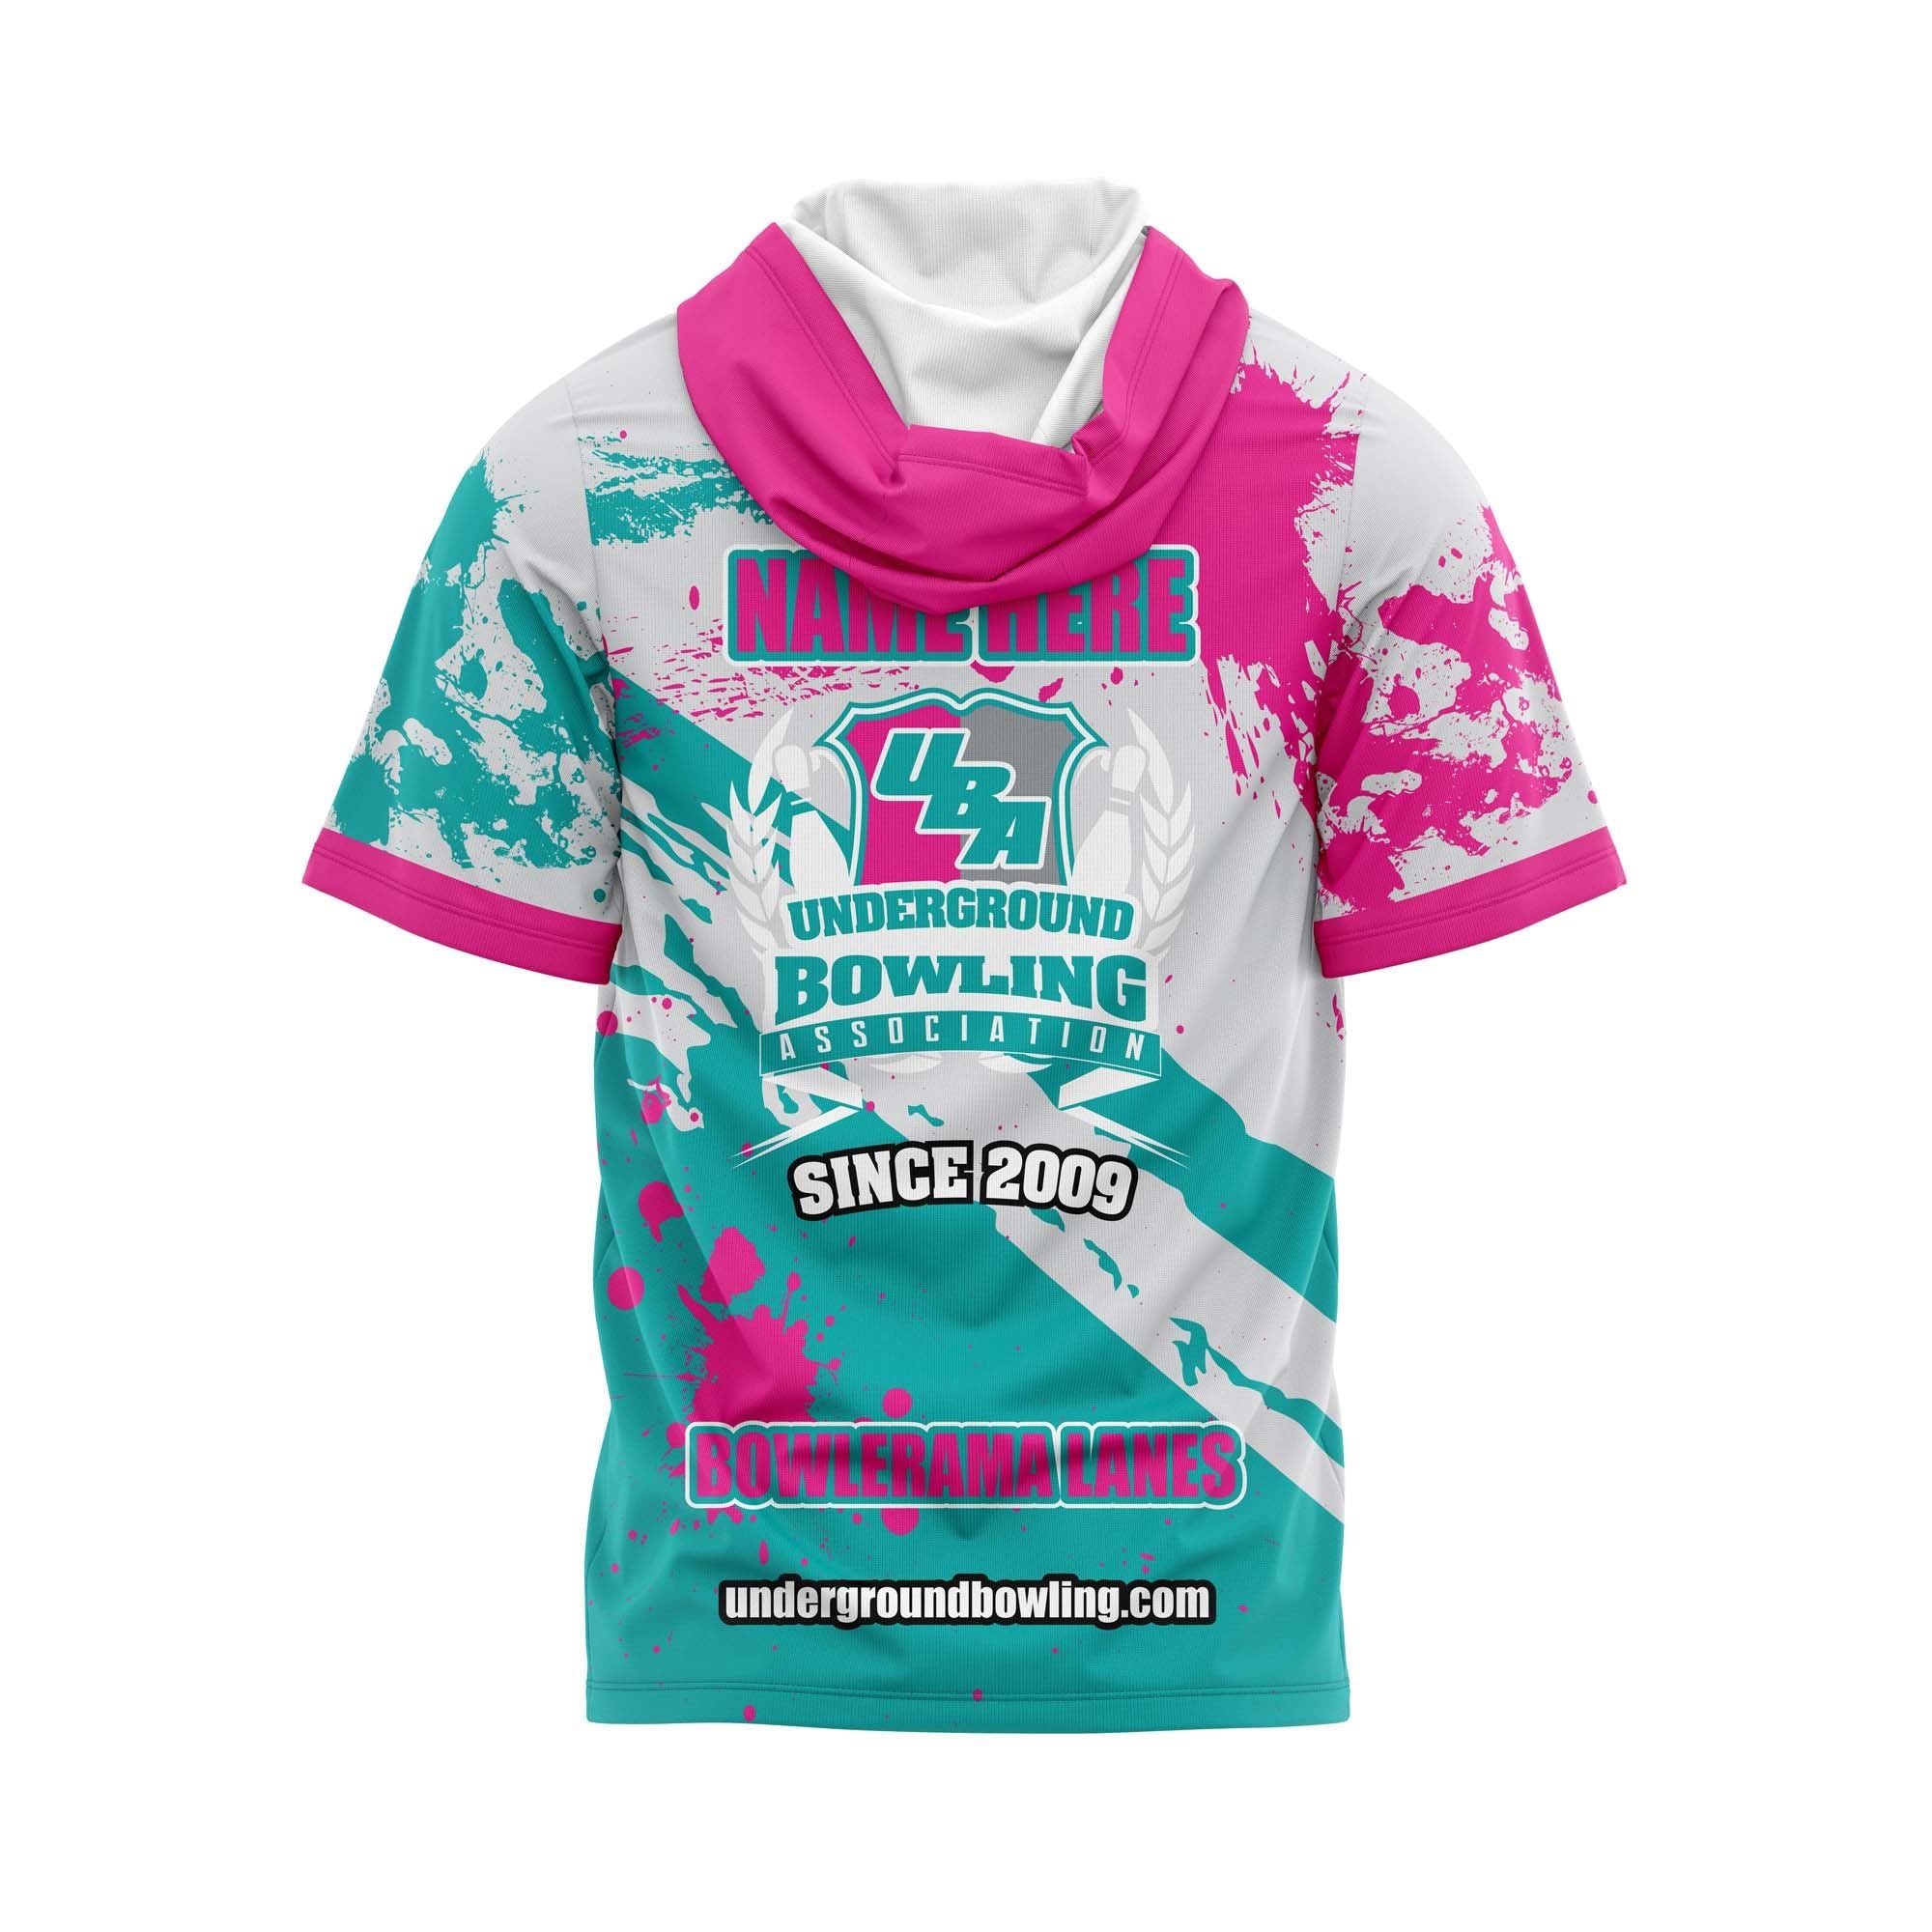 Rival Alliance Pink / Teal Jersey